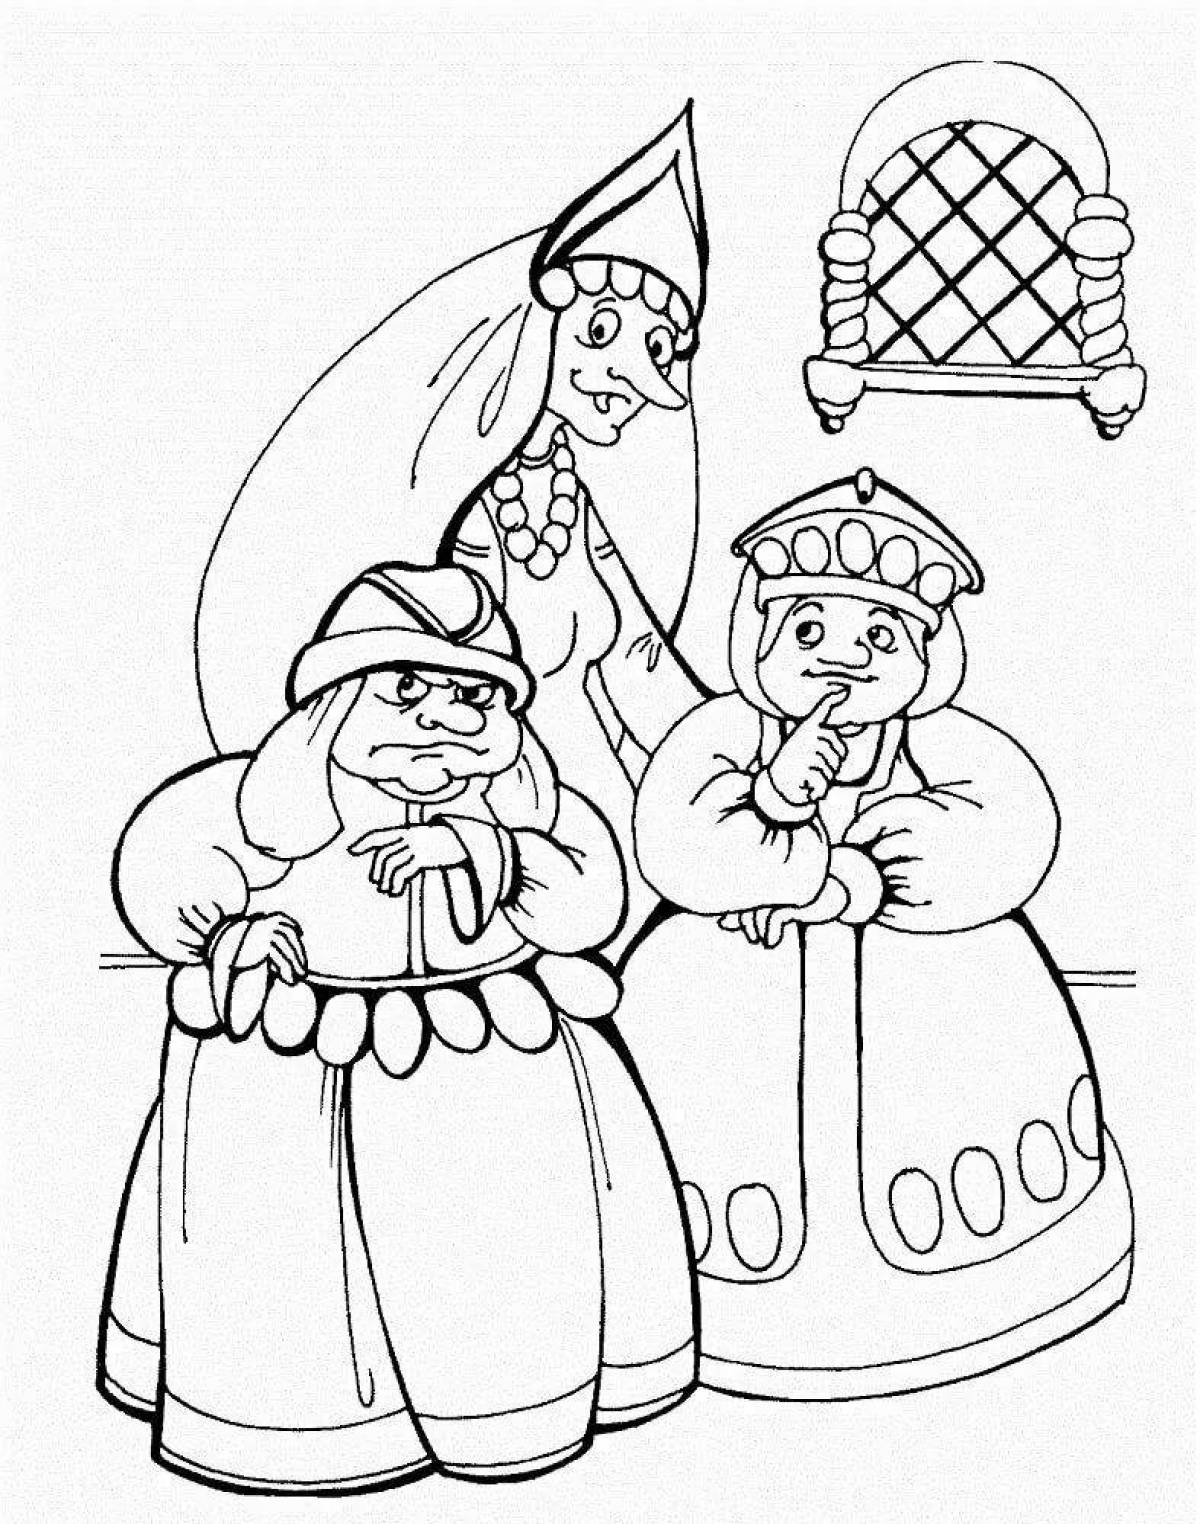 Creative coloring book for the tale of Tsar Saltan